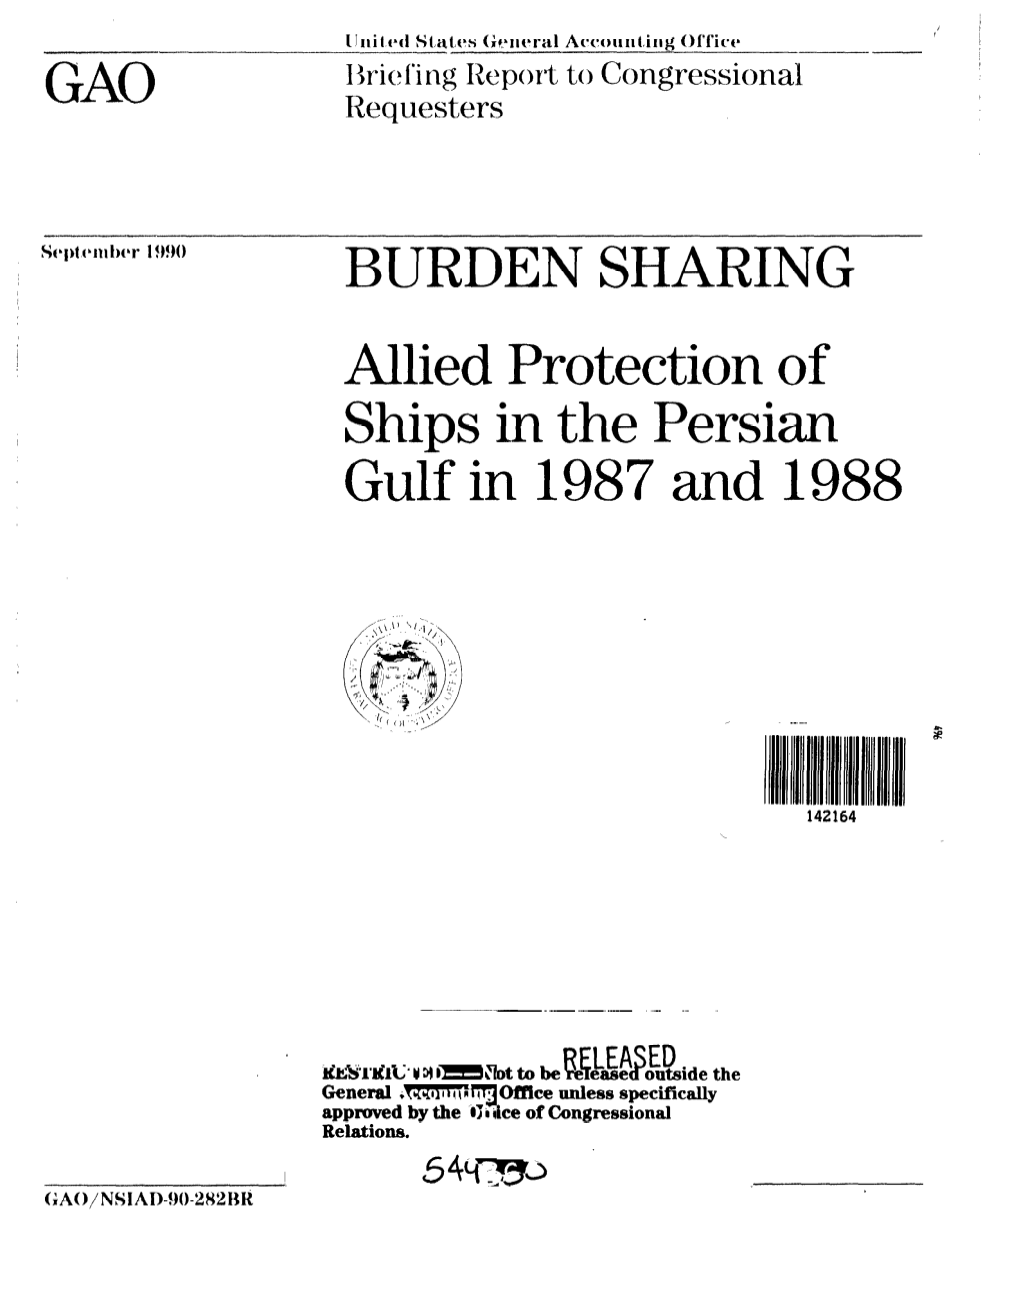 Allied Protection of Ships in the Persian Gulf in 1987 and 1988